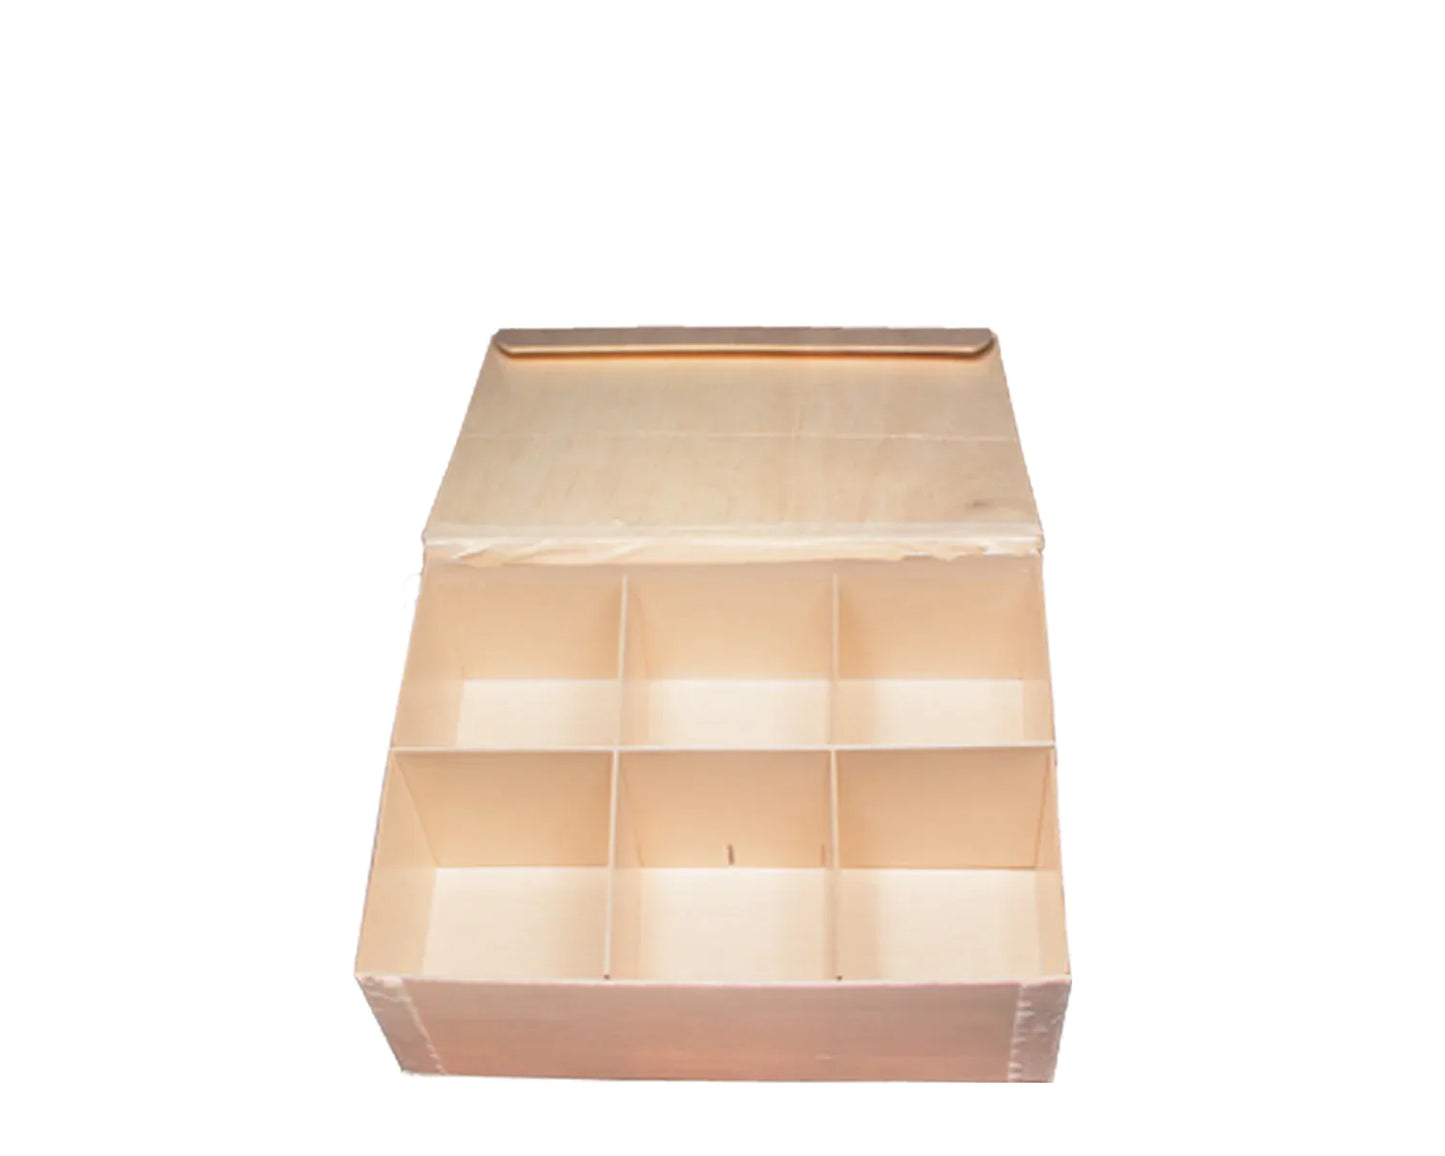 8" x 11" x 3" Collapsible Food Box w/ Attached Lid | Large | 3 Dividers (Case of 50)